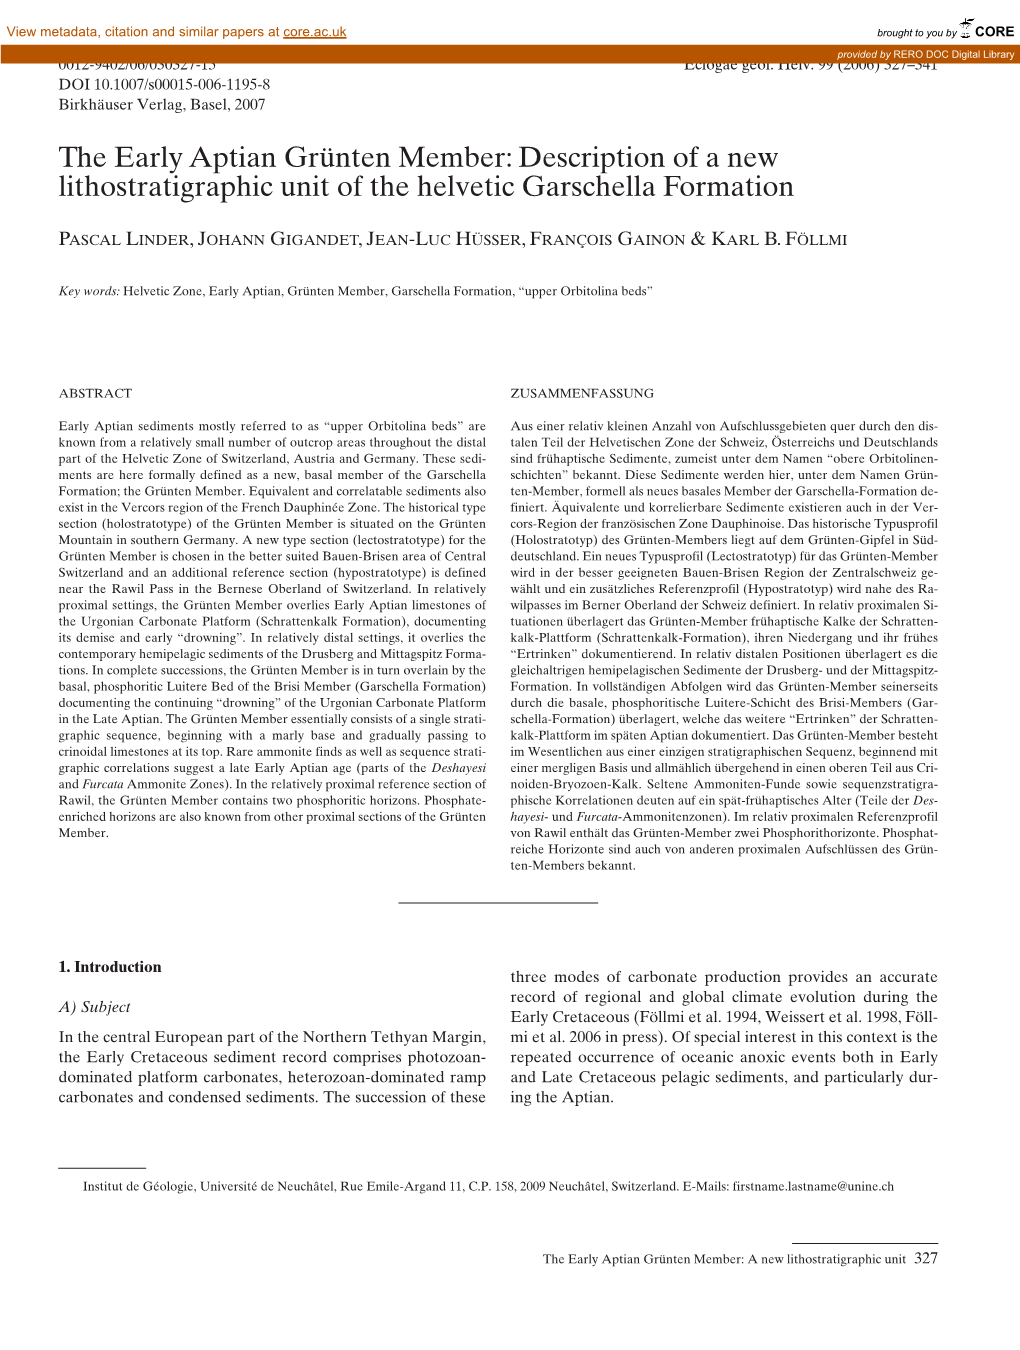 Description of a New Lithostratigraphic Unit of the Helvetic Garschella Formation